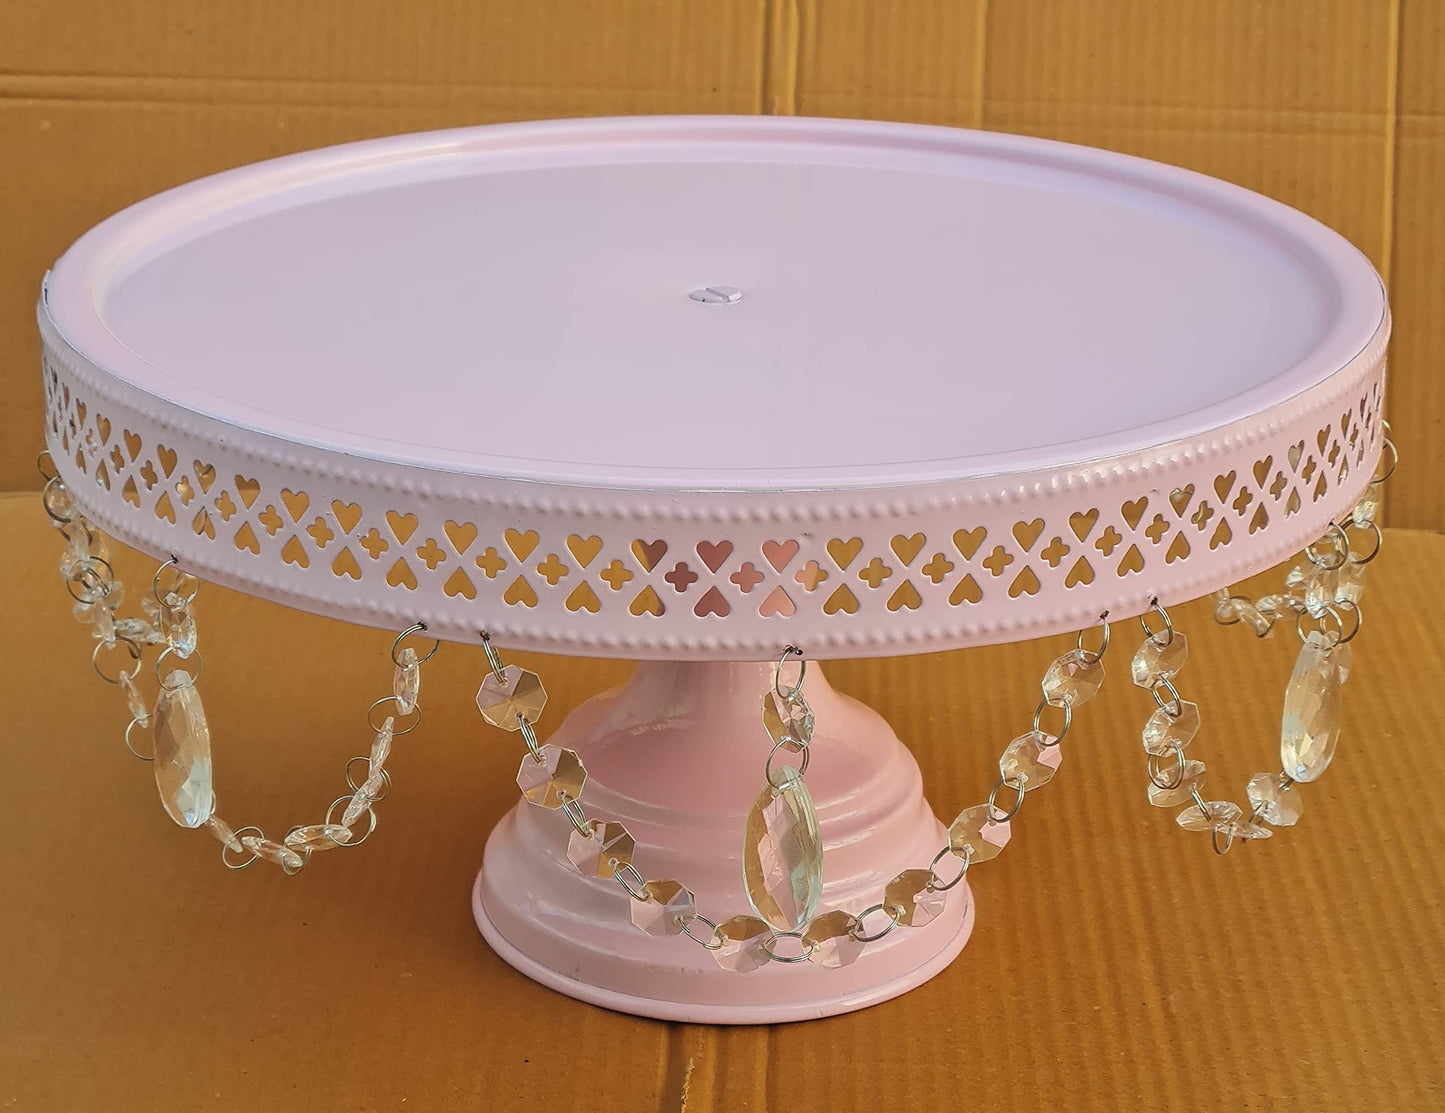 GiftBay Creations Cake Stand Pedestal 11" Diameter (Top), Strong Metal with Clear Hanging Crystals (Pink)